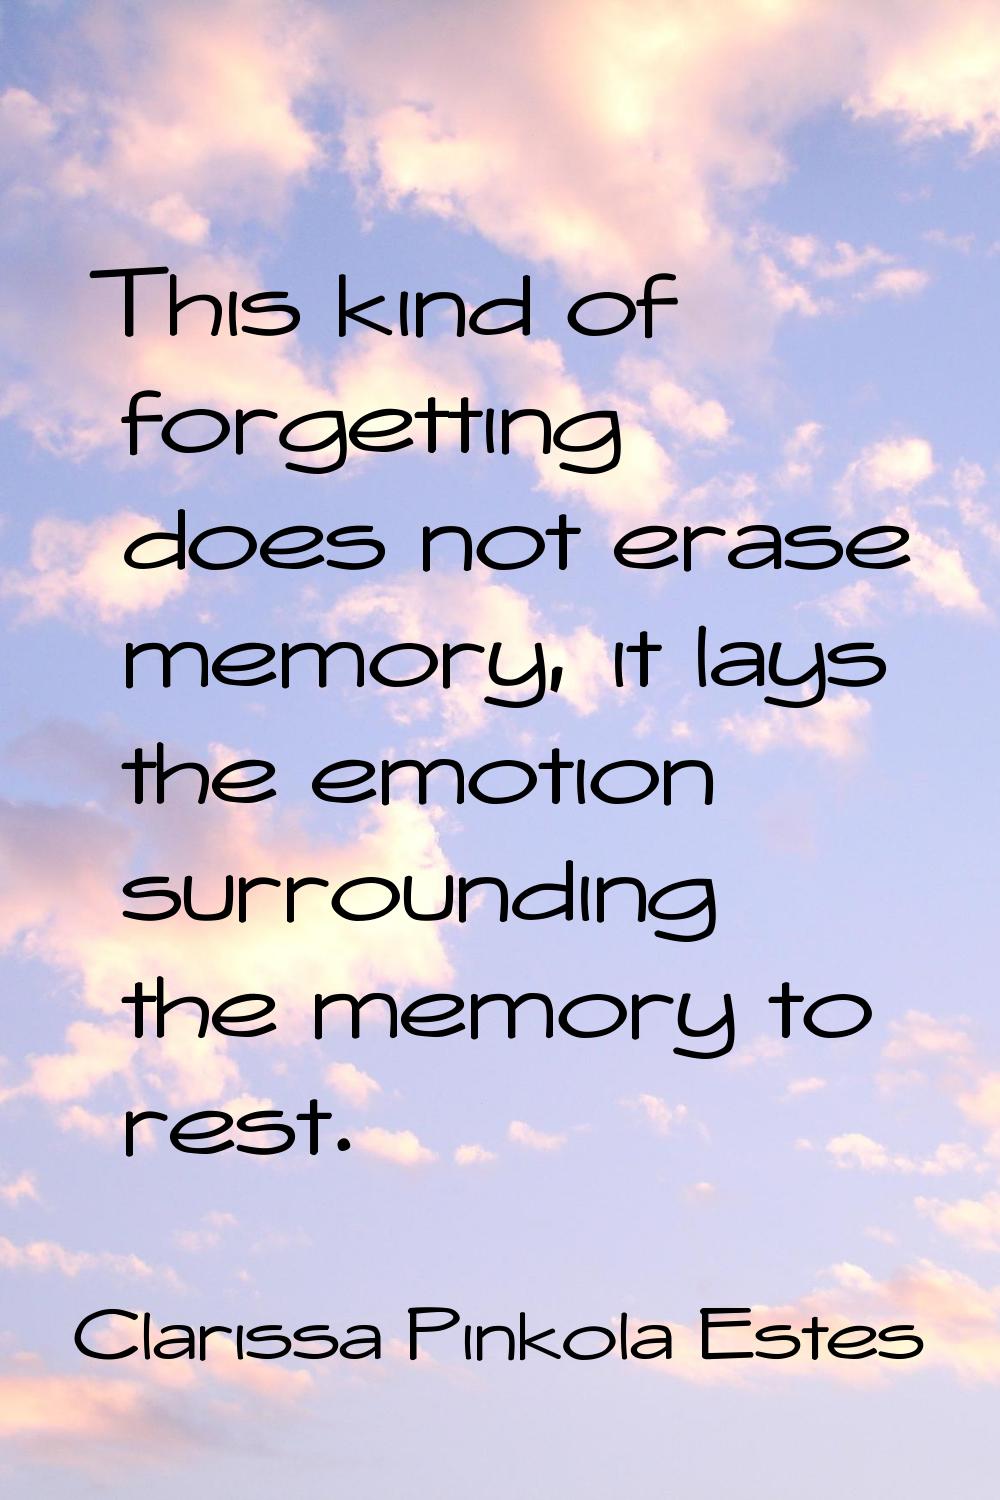 This kind of forgetting does not erase memory, it lays the emotion surrounding the memory to rest.